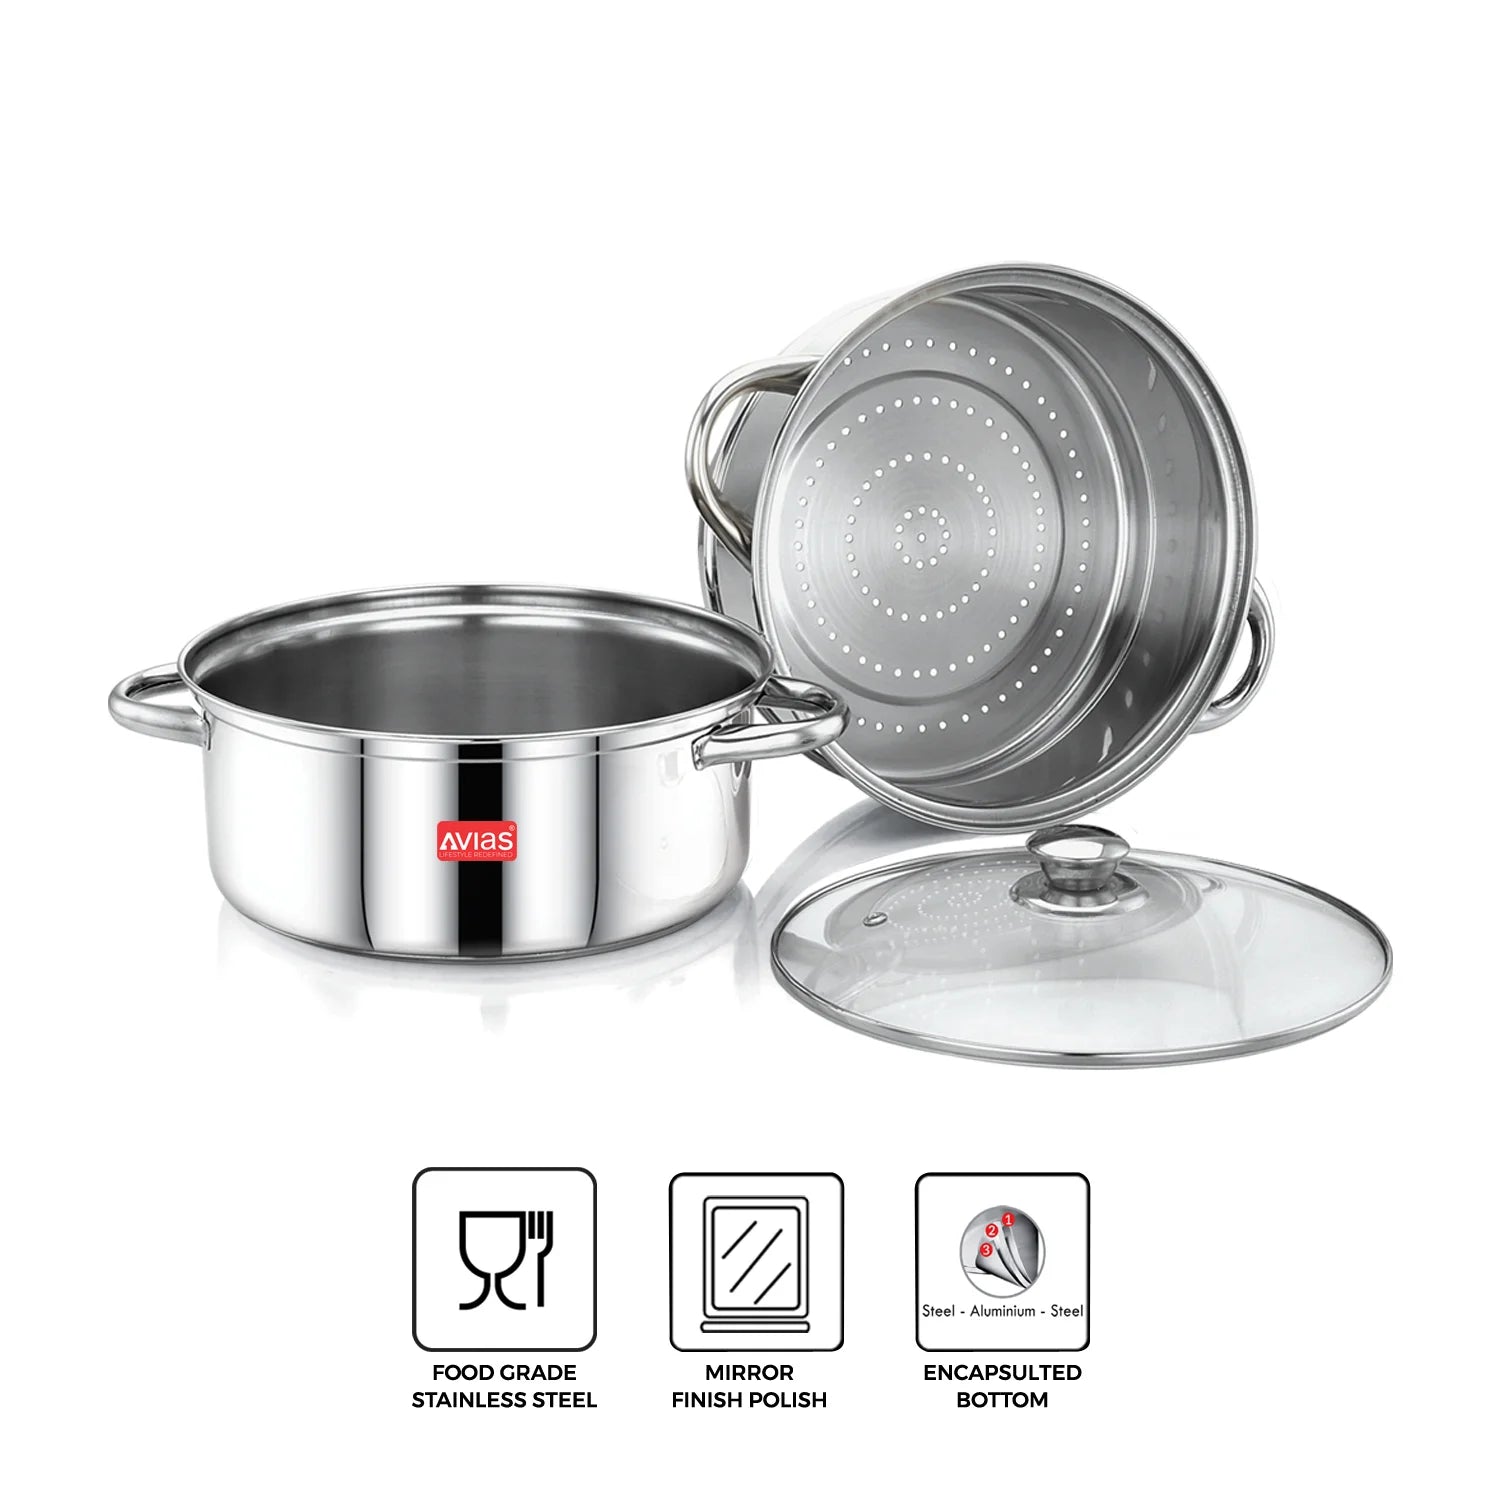 Avias Spectra Stainless steel Steamer features